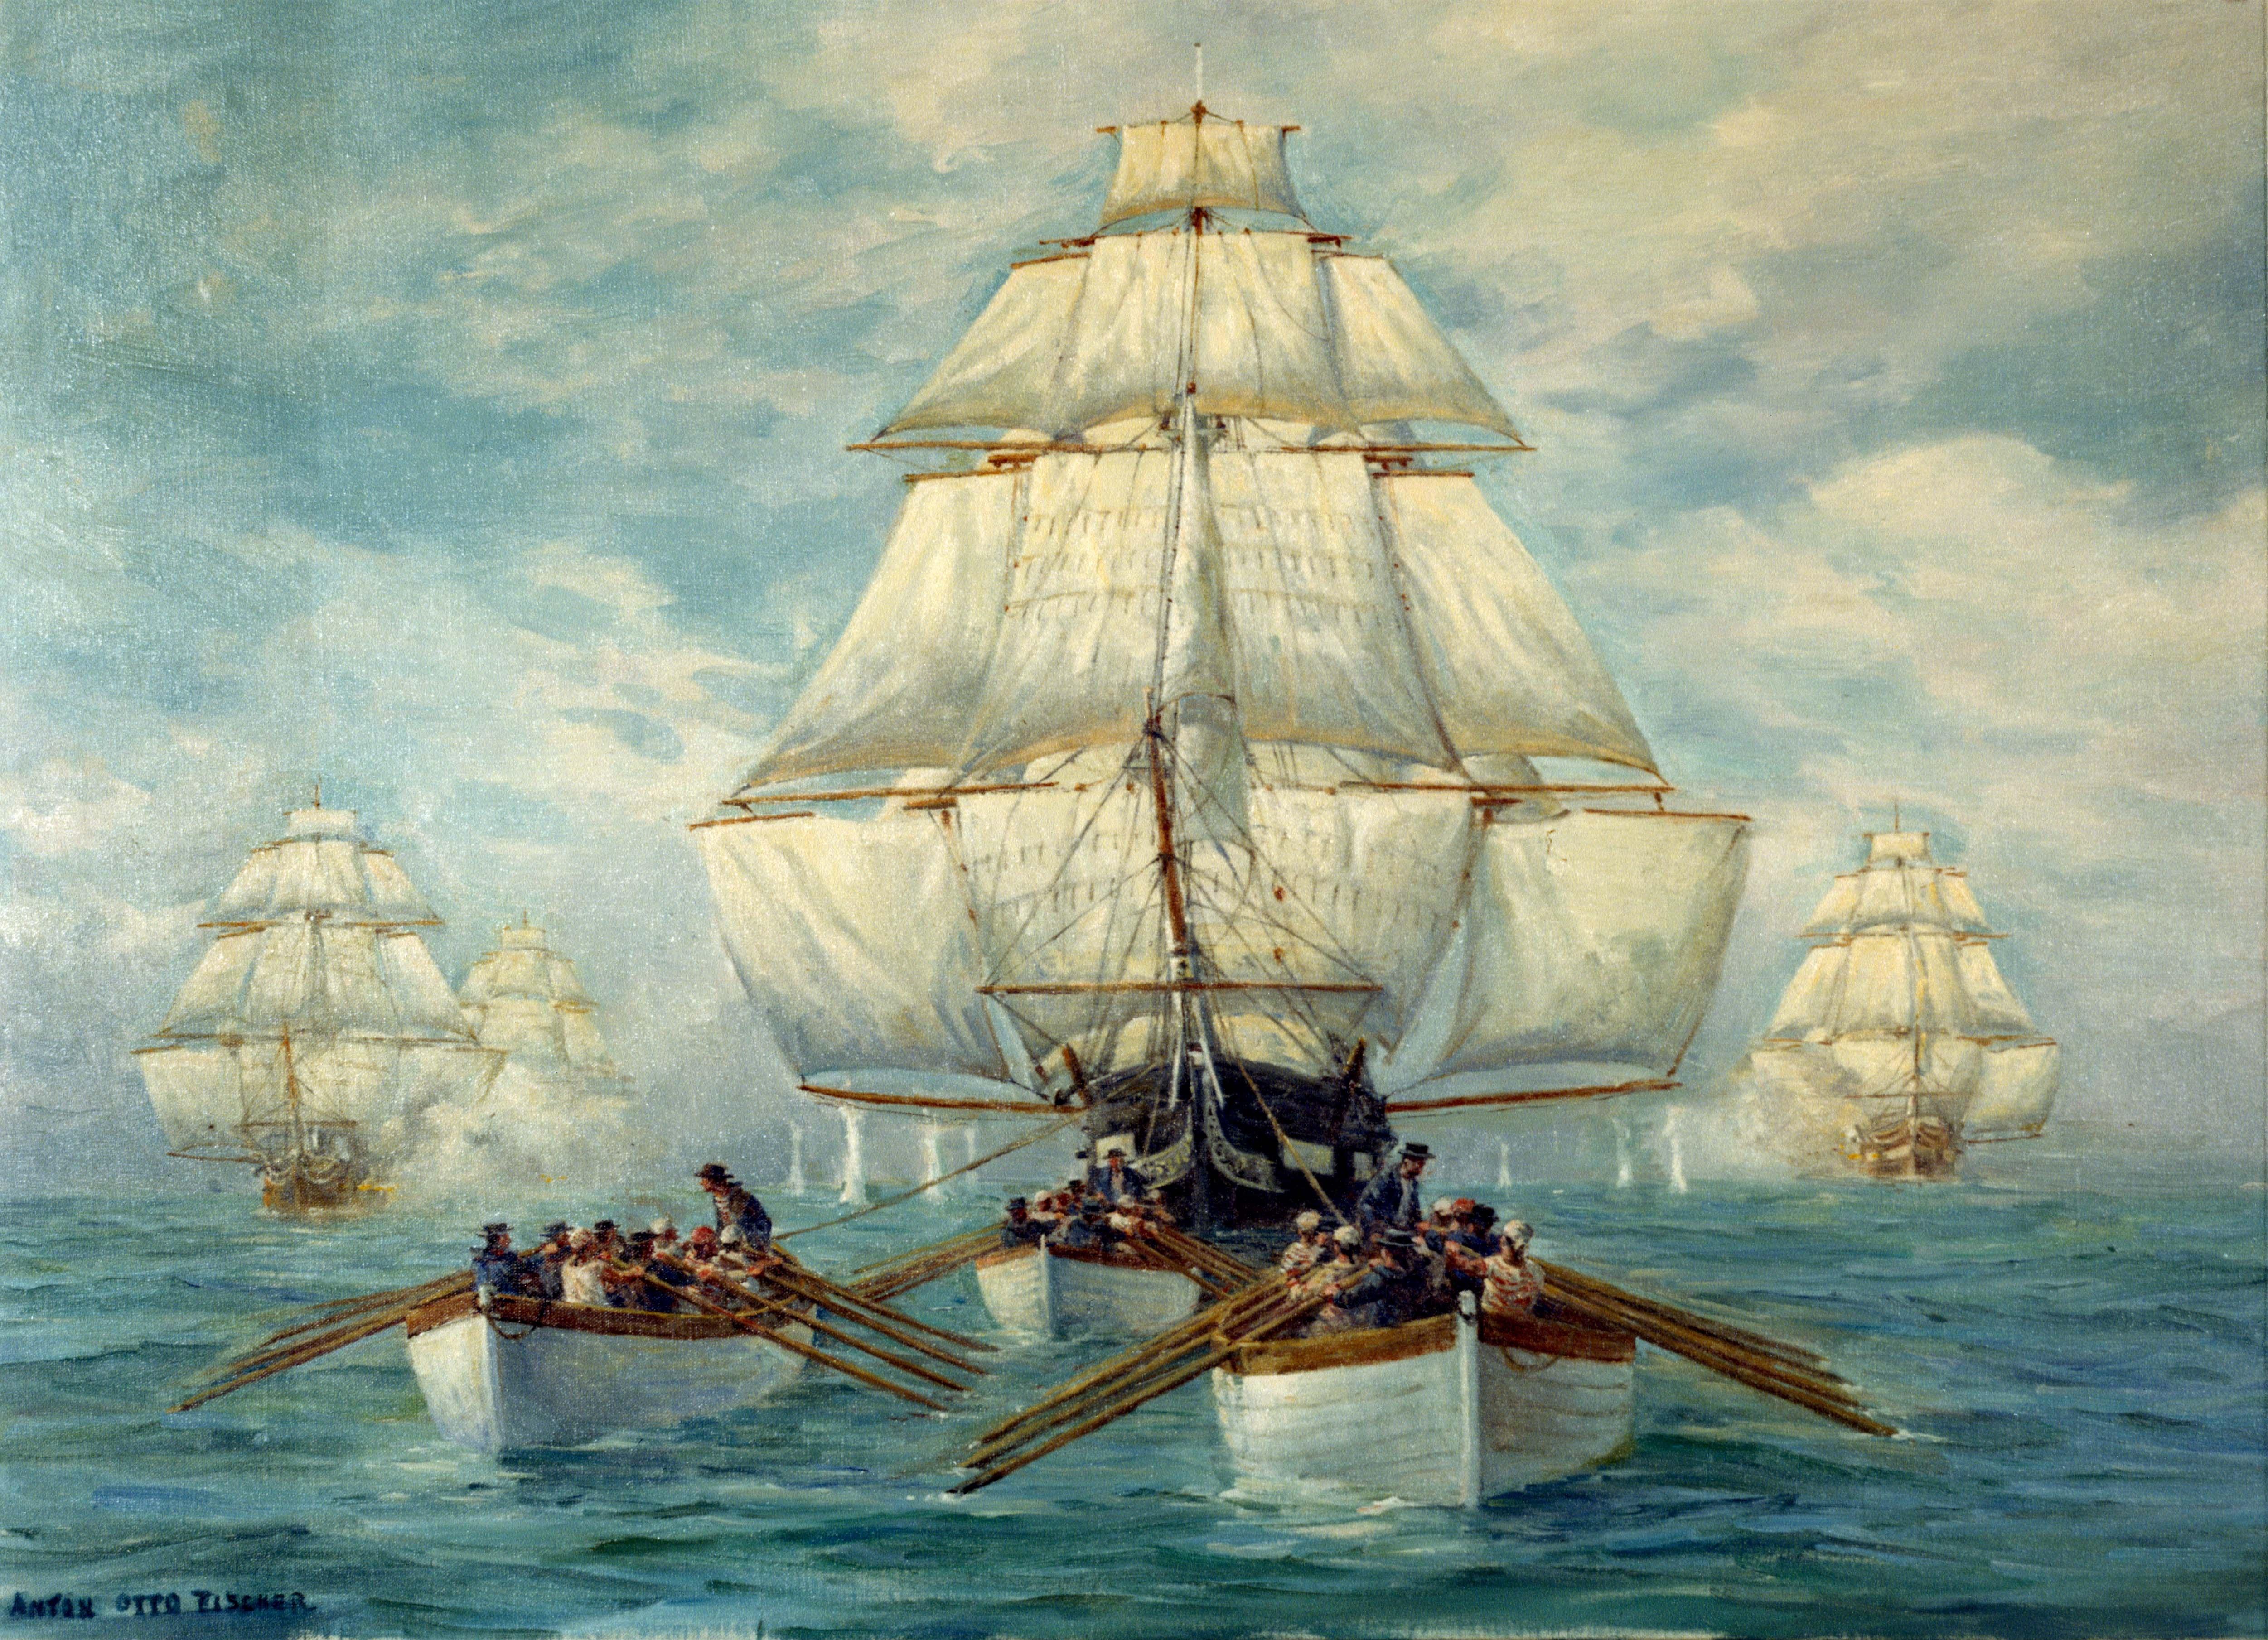 On This Day In History: Aug 1812. USS Constitution Defeats HMS